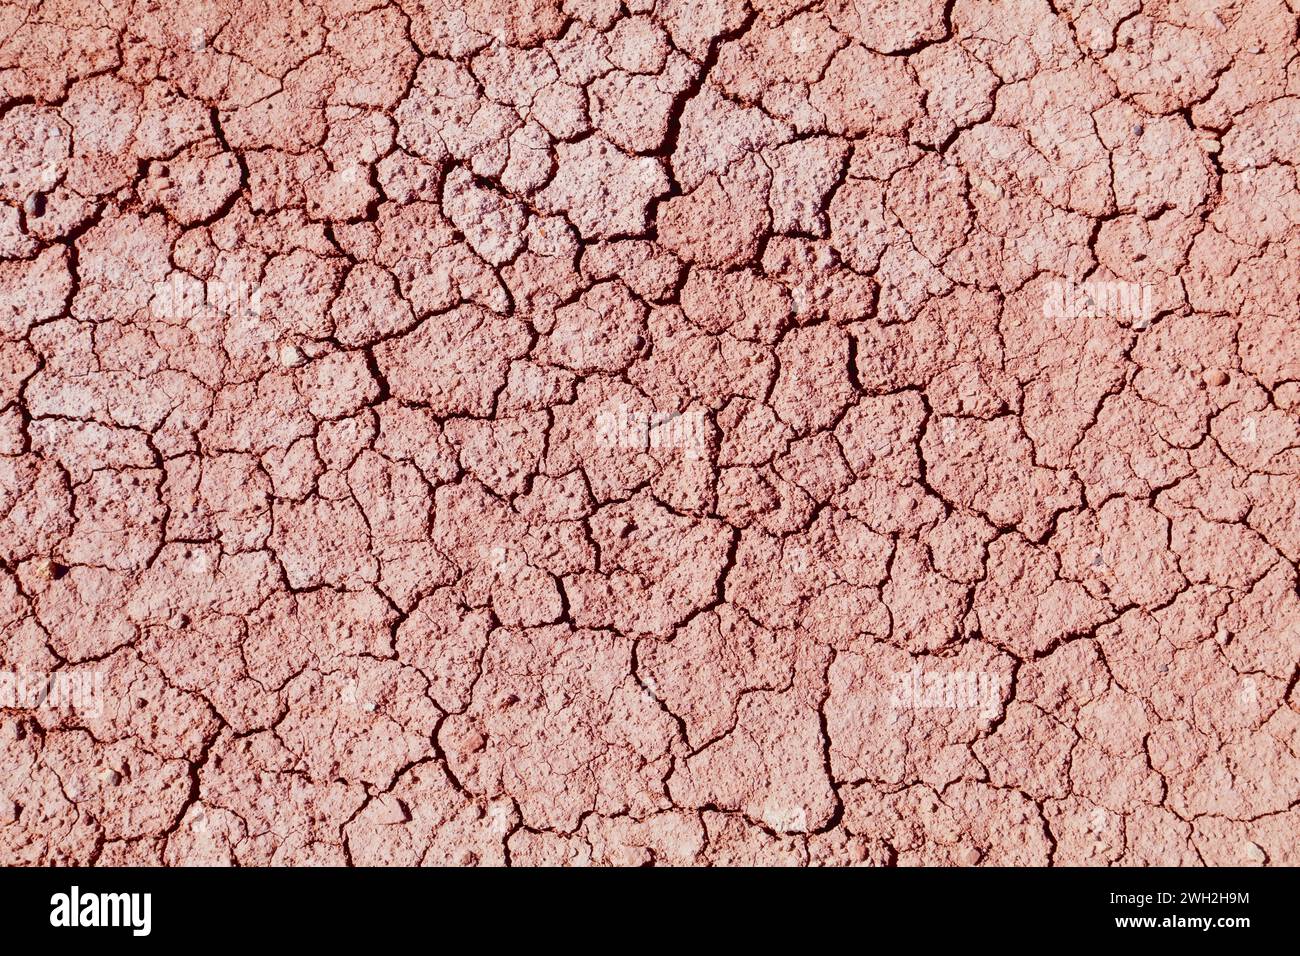 Dried mud surface - dry riverbed earth texture. Drought in India. Stock Photo